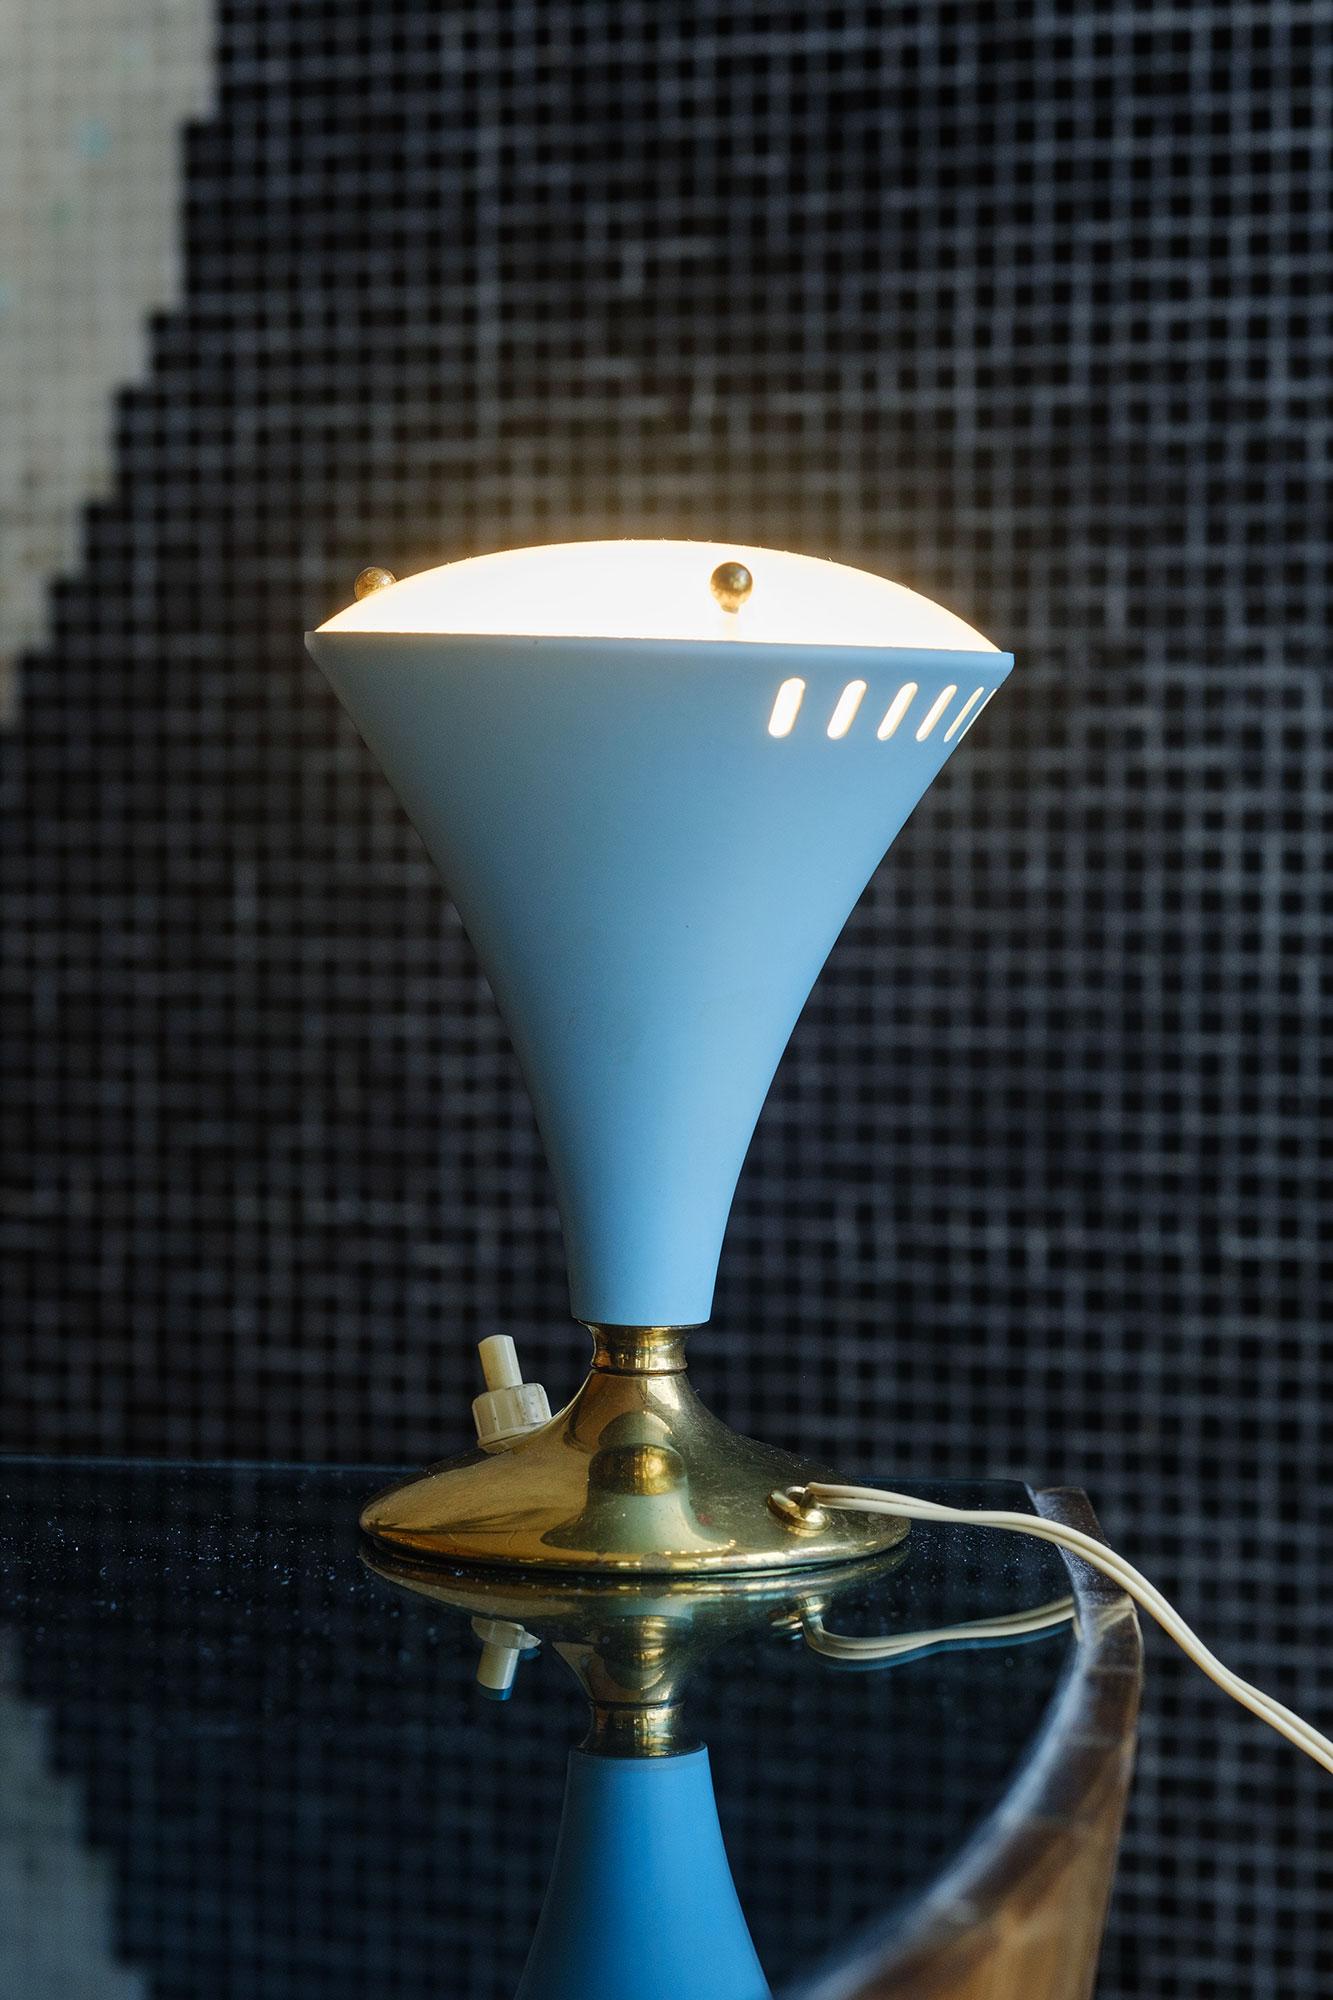 Splendid table lamp in brass and metal with a glass top by Gilardi & Barzaghi, Milano, 1950s
In great working condition.